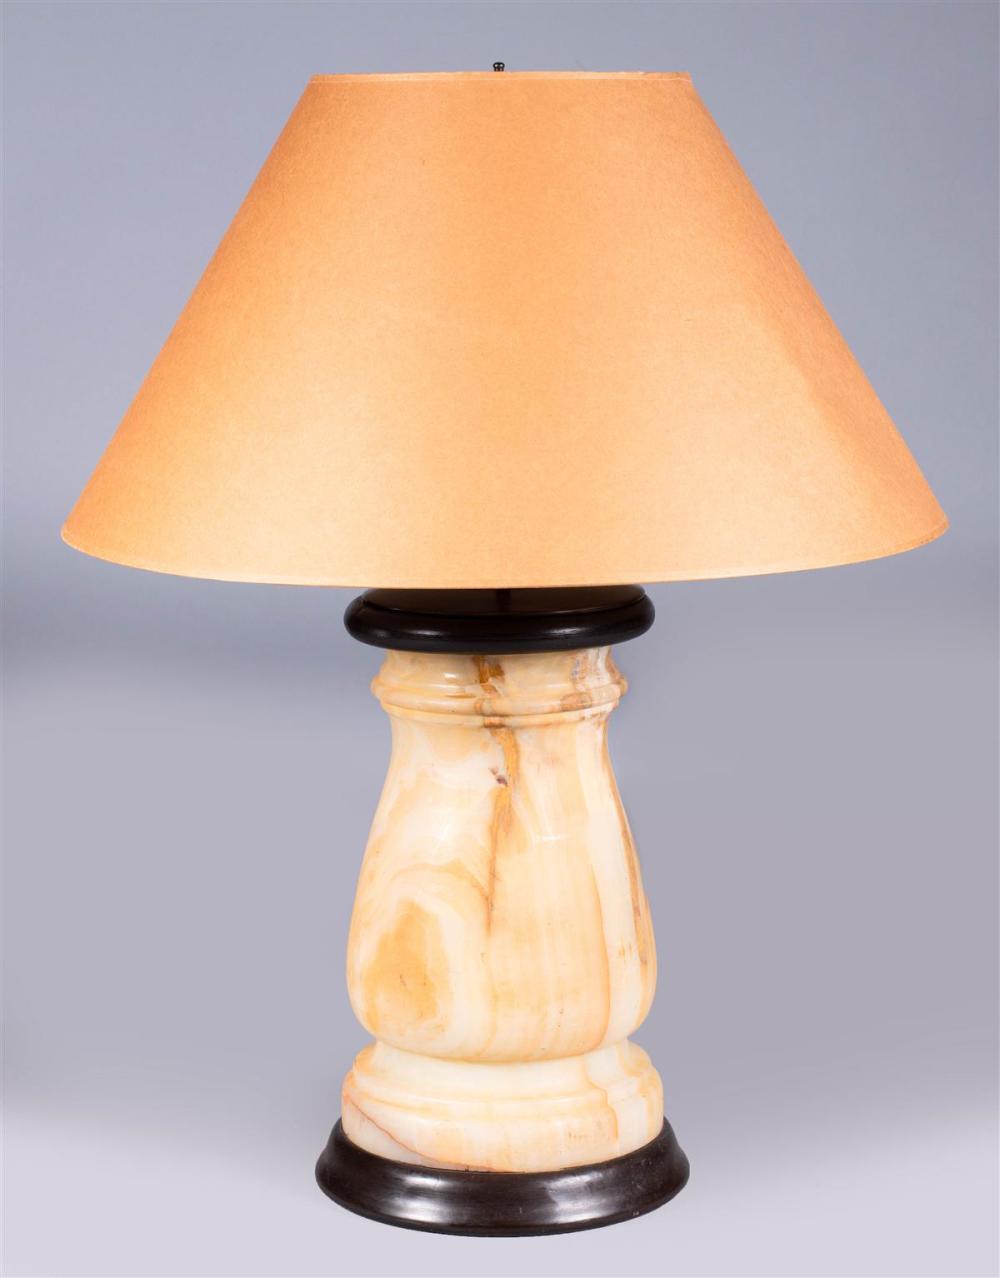 NEOCLASSICAL STYLE ONYX LAMP, LATE 19TH/EARLY